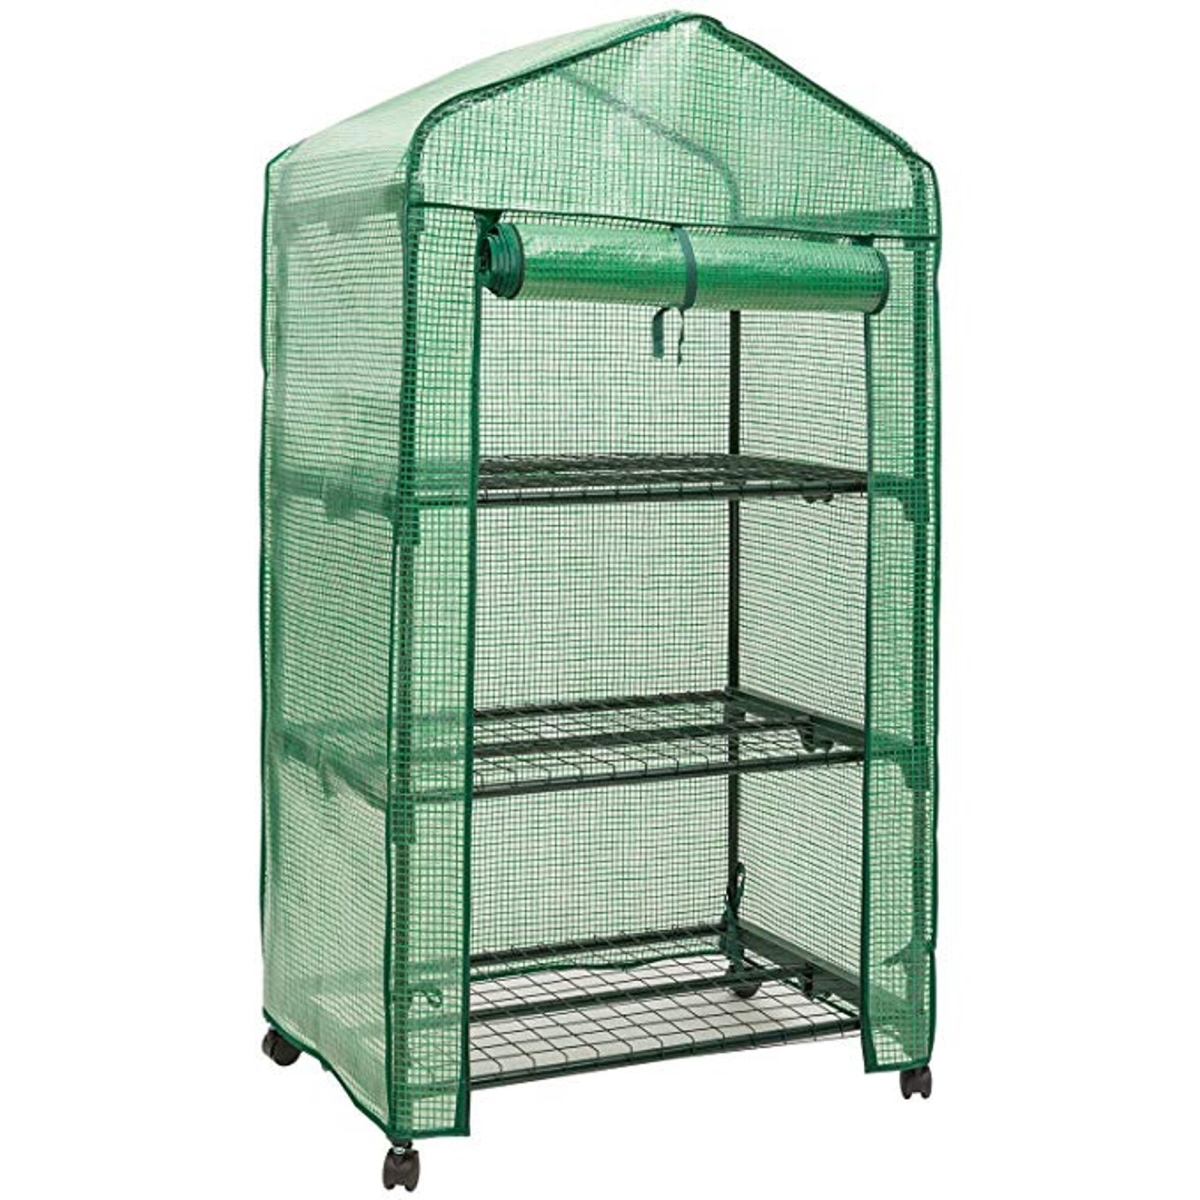 Picture of Genesis GEN-3PE 3 Tier Portable Rolling Greenhouse with Opaque Cover